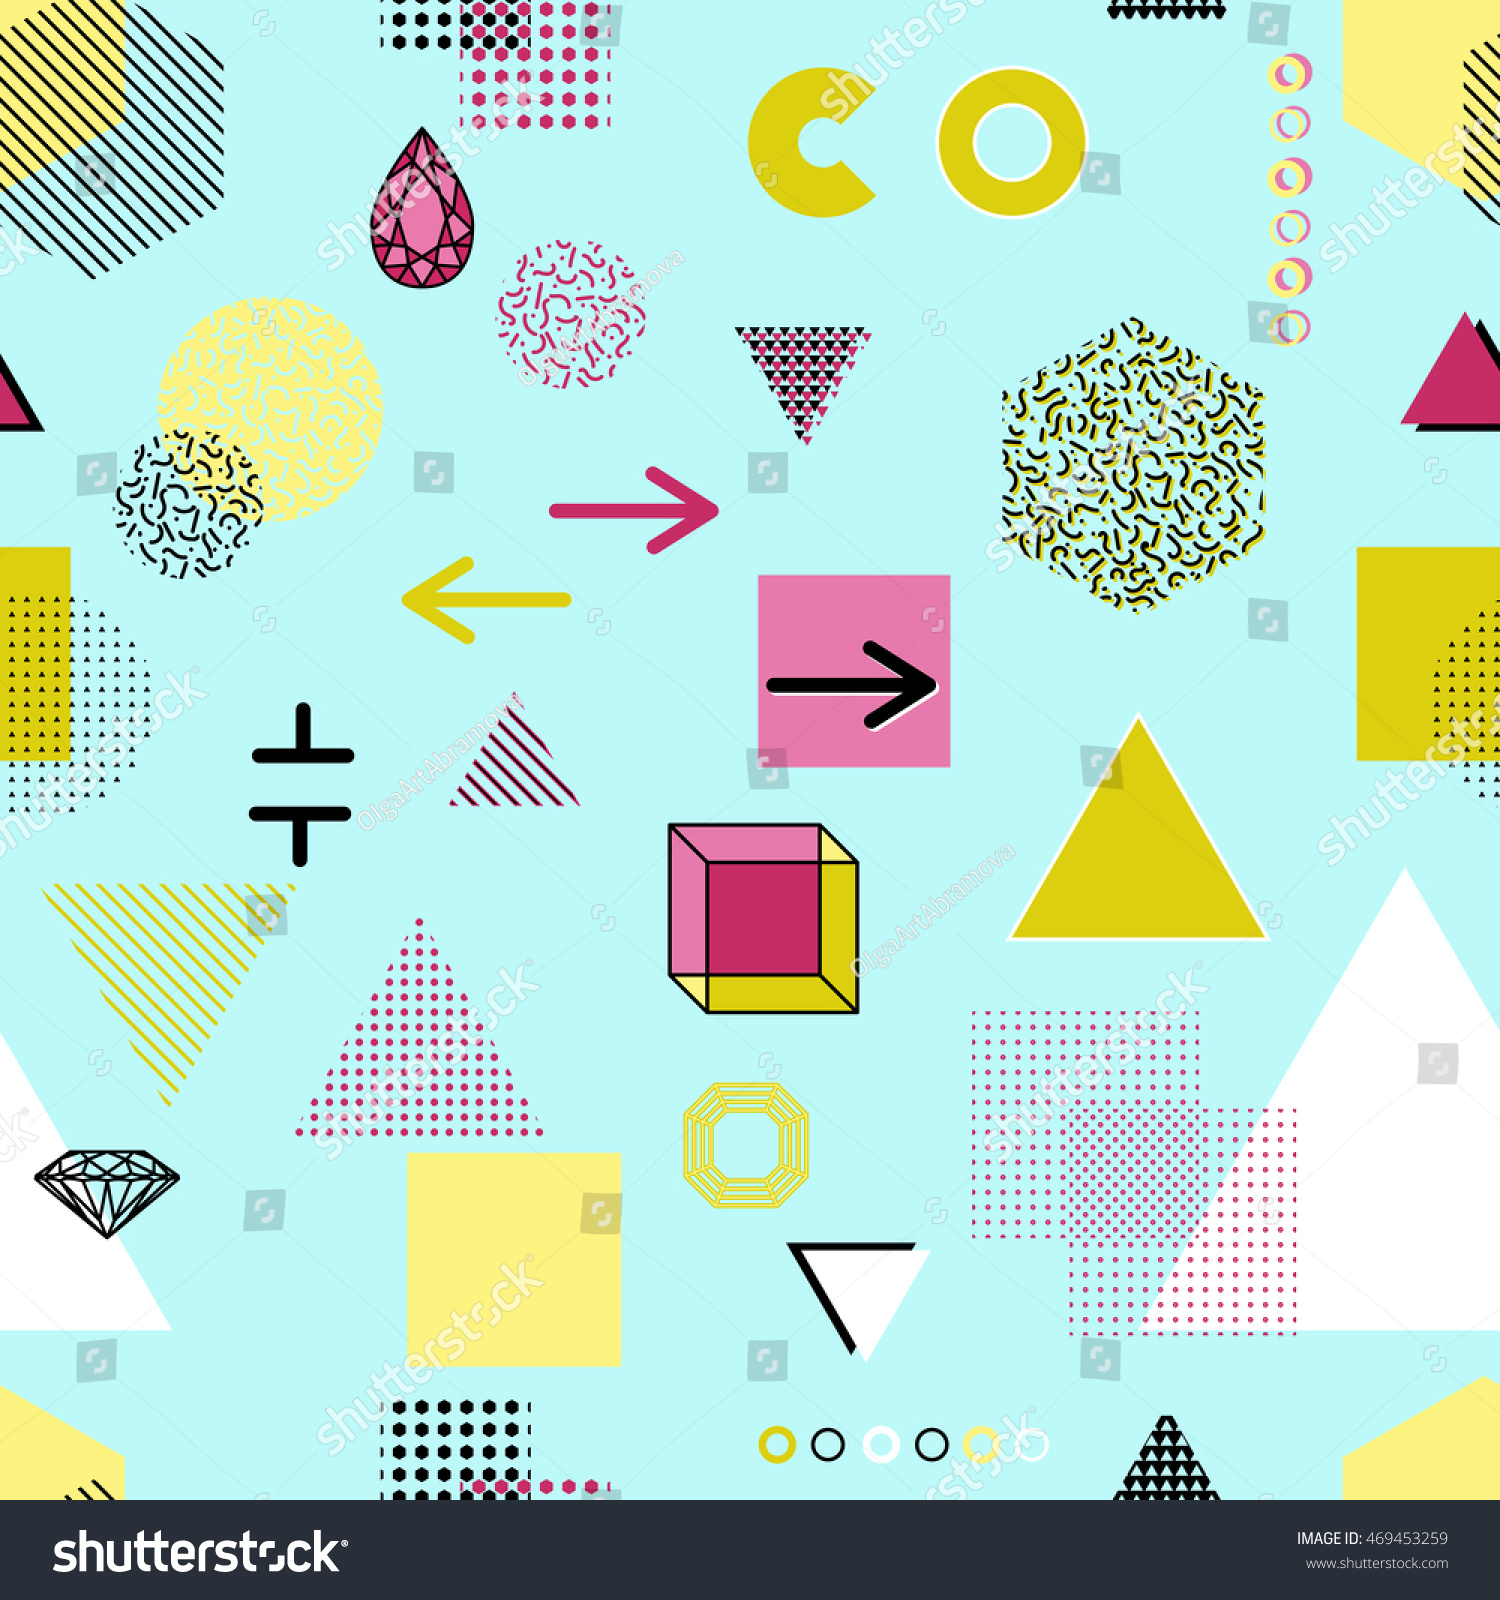 Trendy geometric elements memphis cards, seamless pattern. Retro style texture. Modern abstract design poster, cover, card design. #469453259